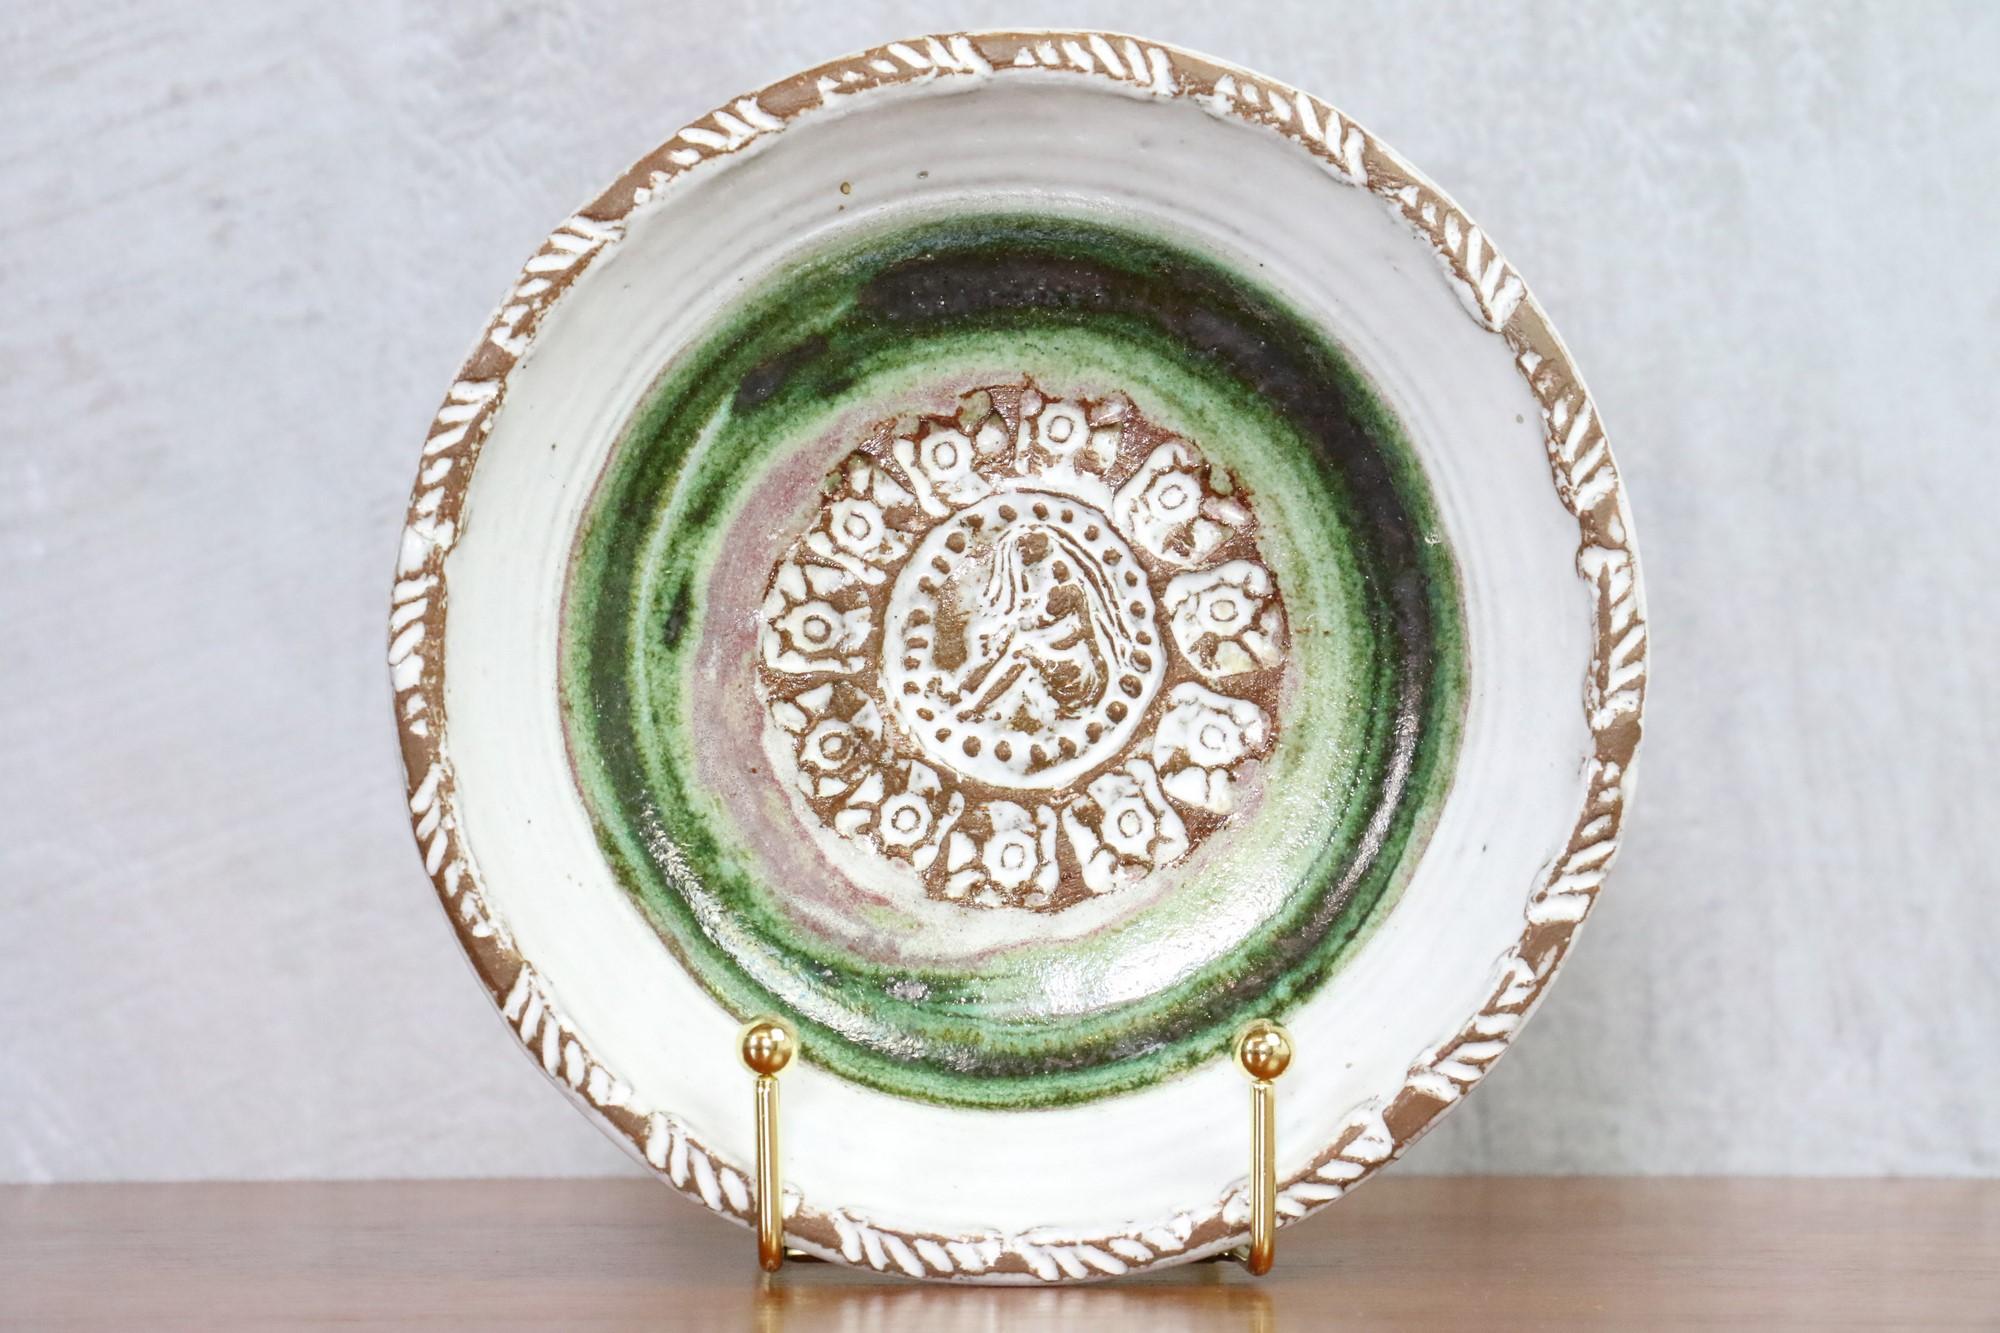 Mid-century French Ceramic decorative plate by Albert Thiry - 1960s 

Very nice green and brown decorative plate. In the center is a setting of a seated woman surrounded by abstract motifs.
The colors and the work of the chamotte clay are typical